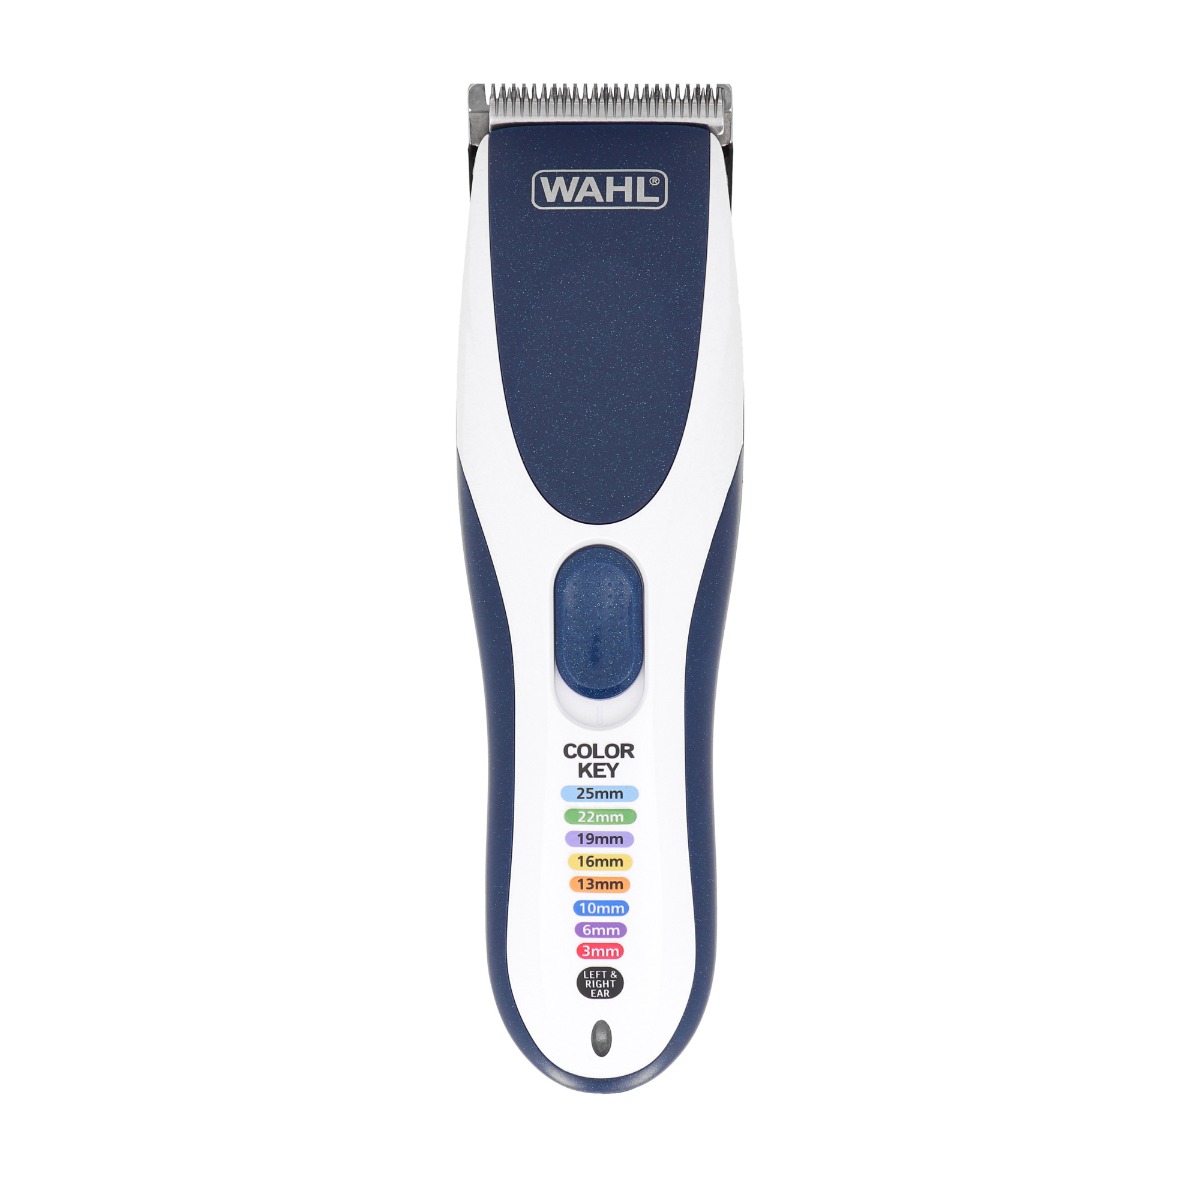 WAHL 09649-916 ColorPro Cordless Combo WAHL